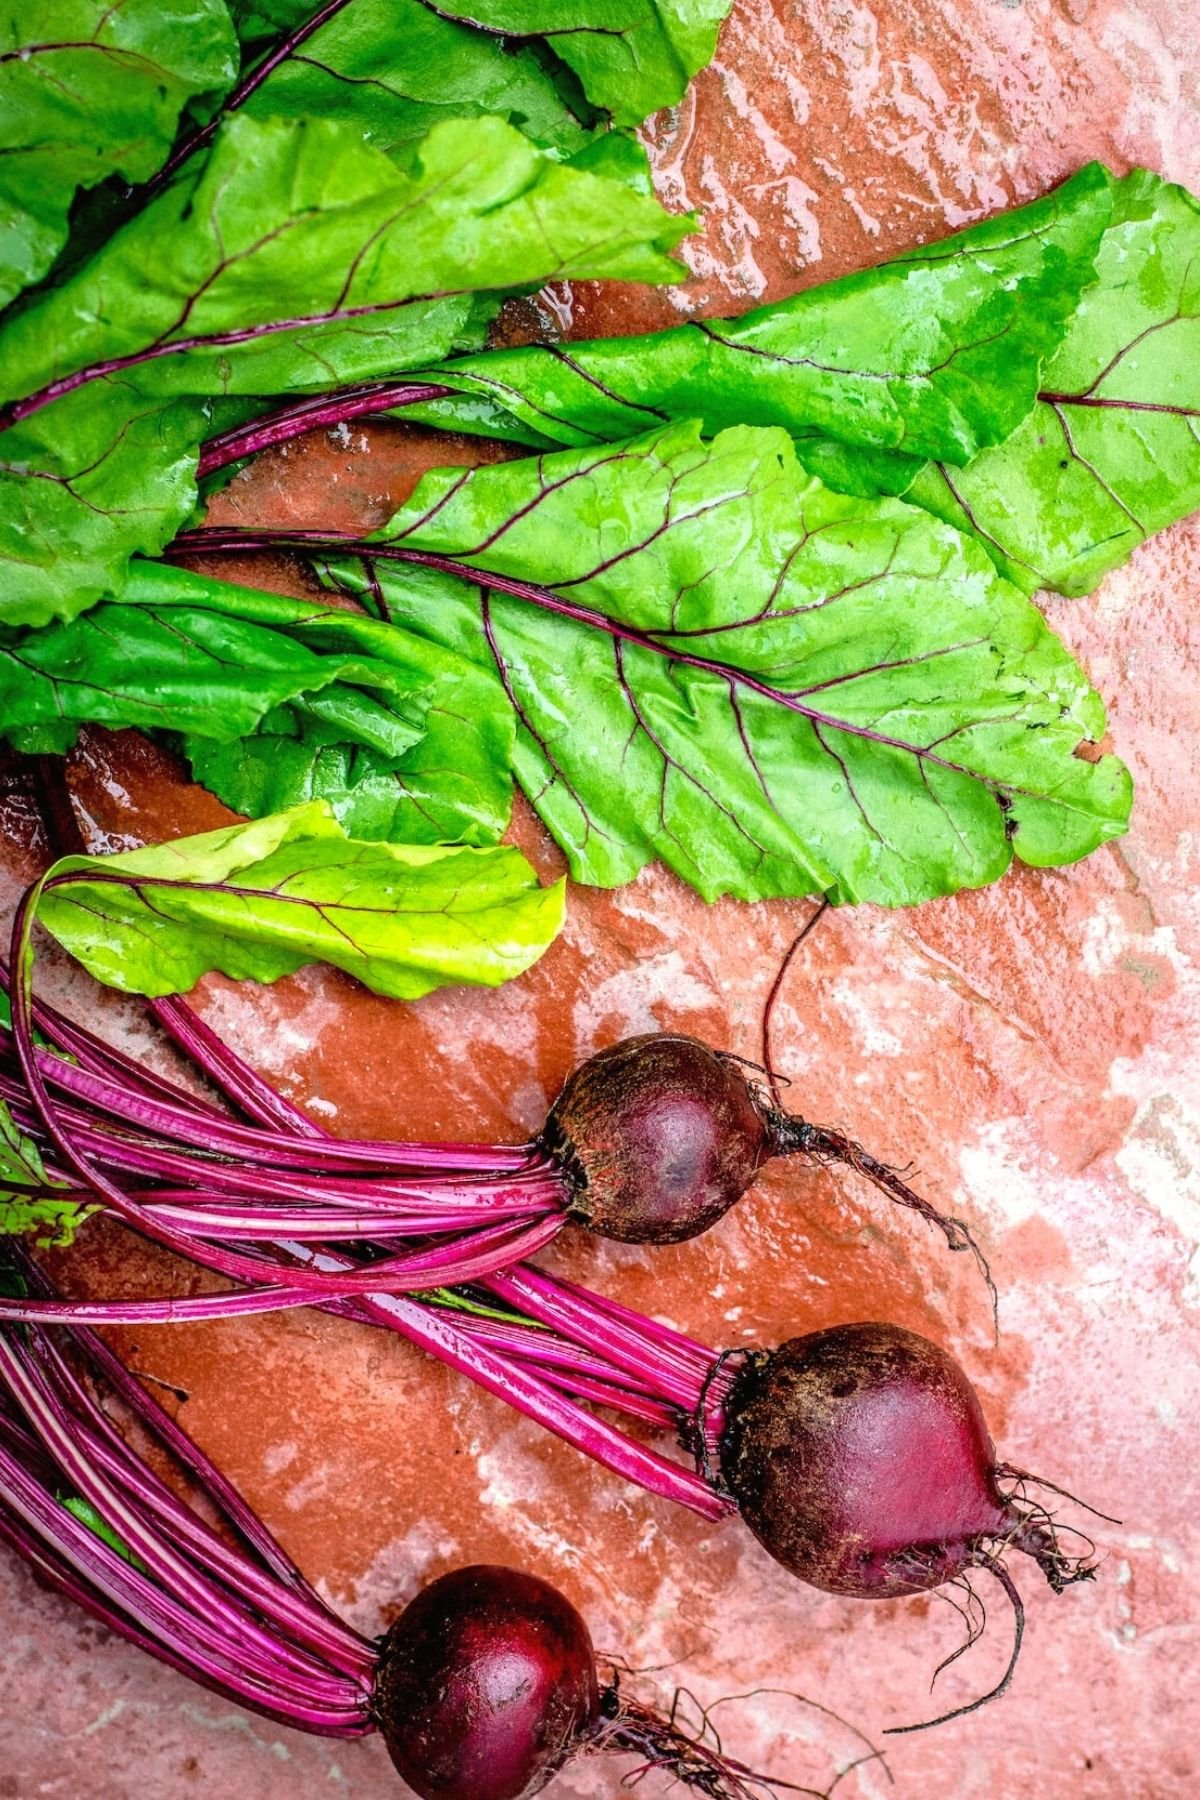 beet green recipes healthy ways to cook beet greens in a smoothie from red or golden beet greens